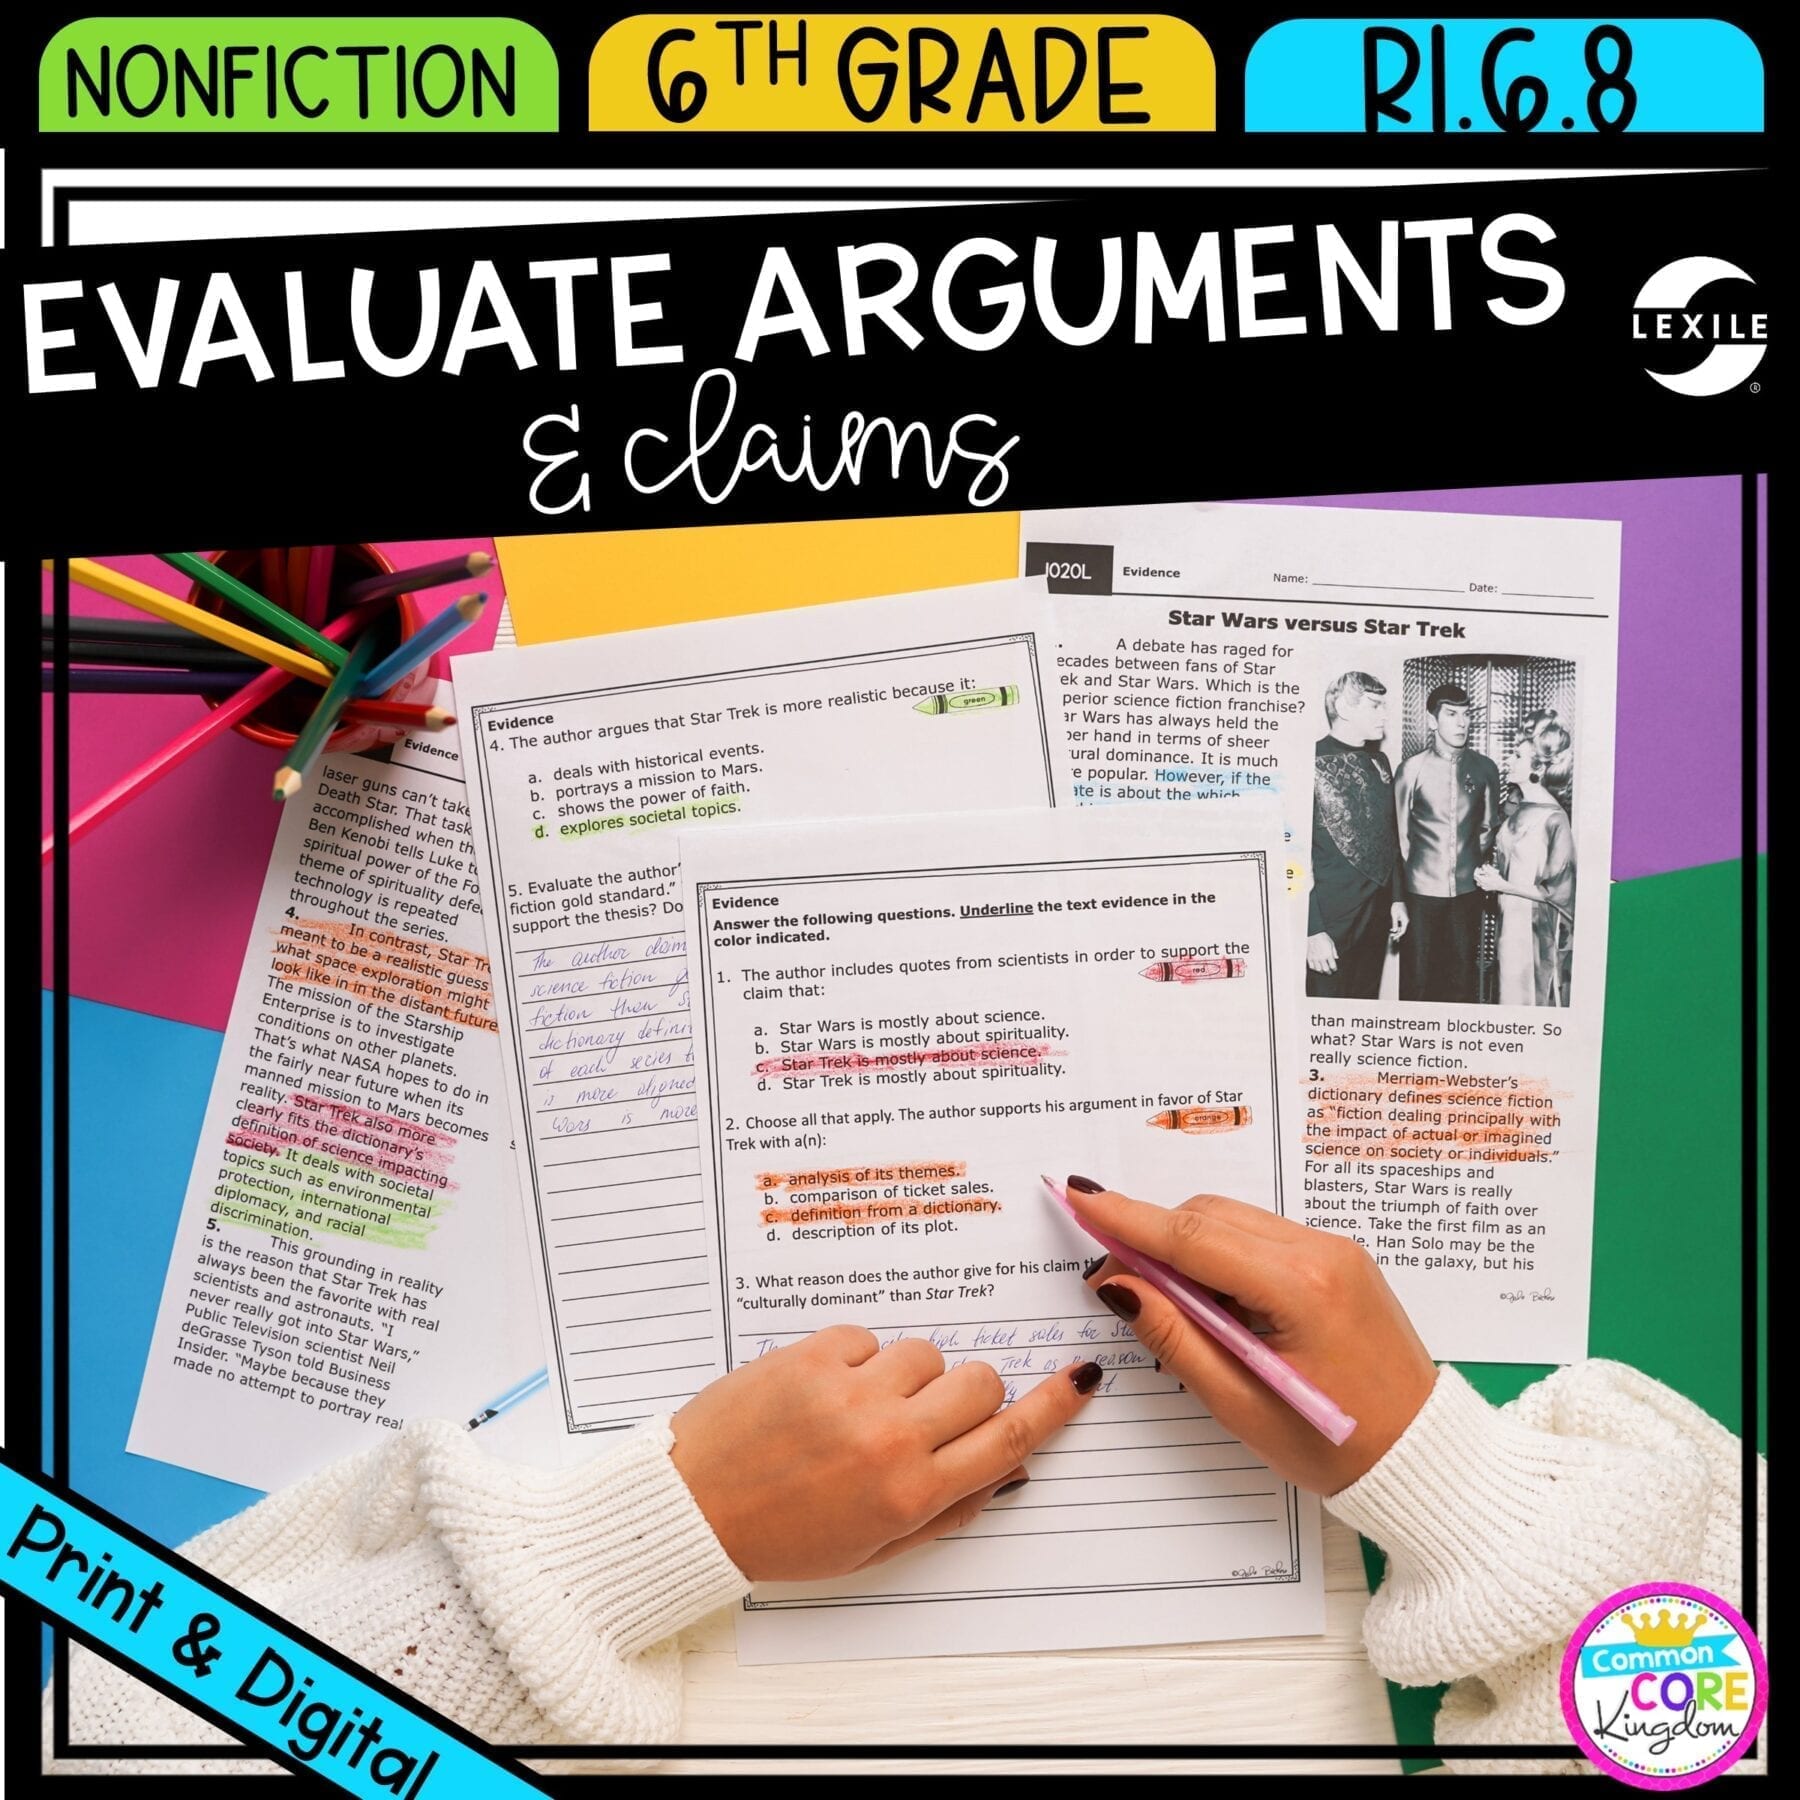 Evaluate Arguments and Claims for 6th grade cover showing printable and digital worksheets